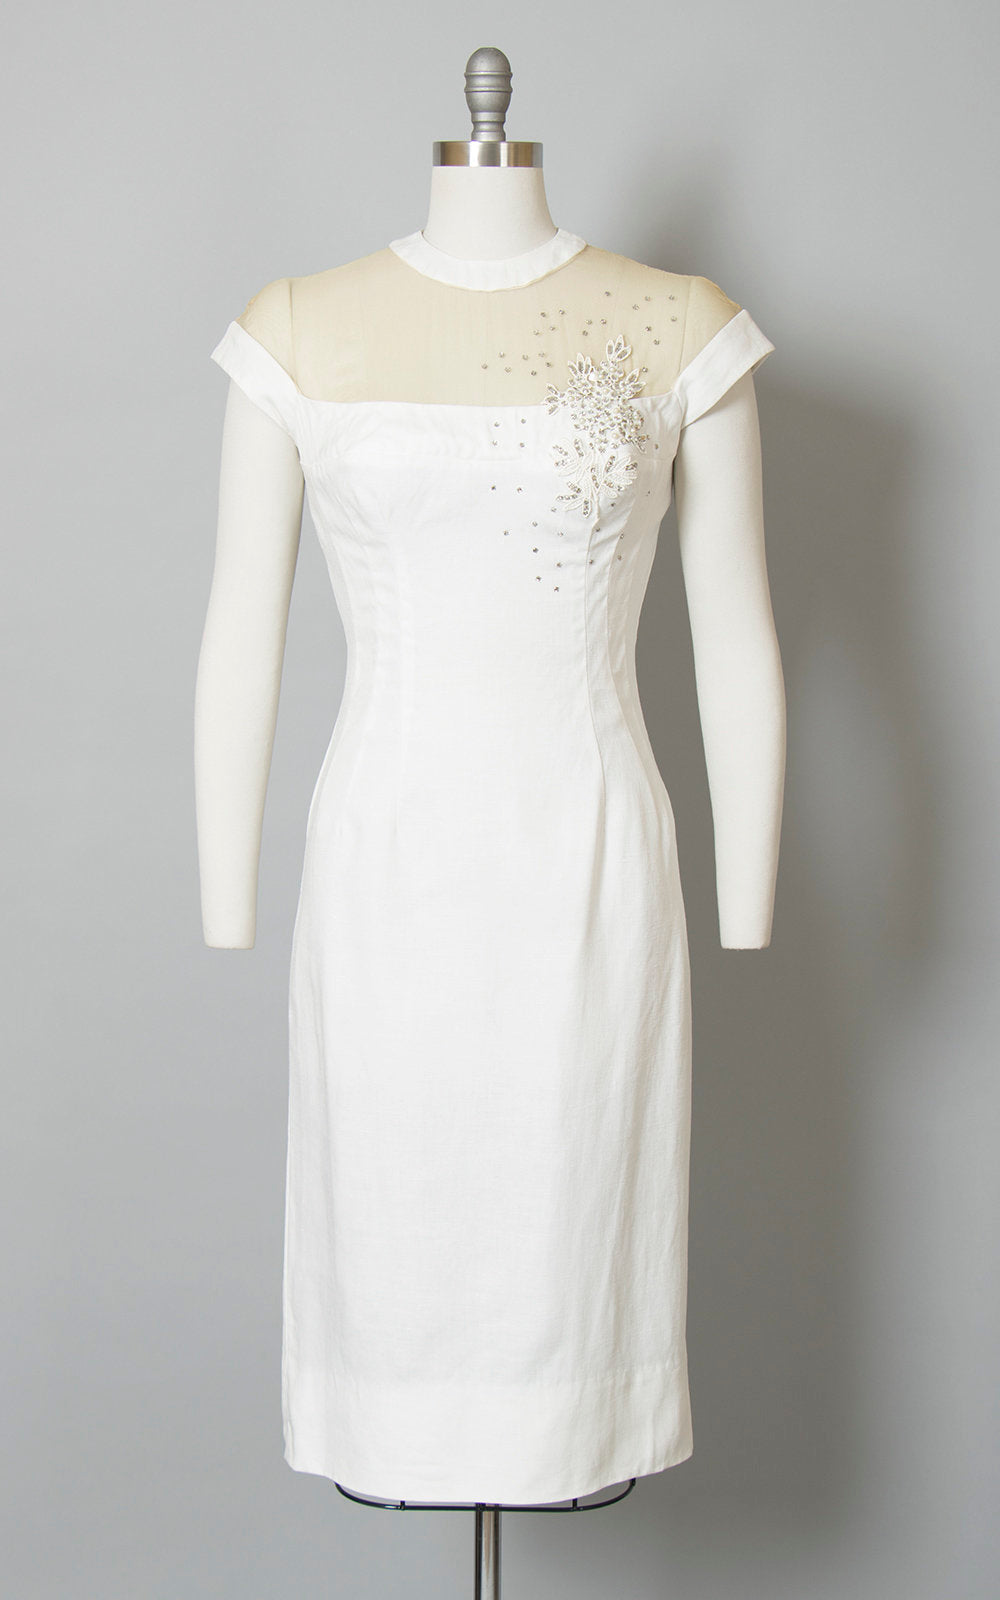 Vintage 1950s Dress | 50s White Linen Sheer Mesh Neckline Rhinestone Beaded Lace Wiggle Cocktail Party Bombshell Dress (small)